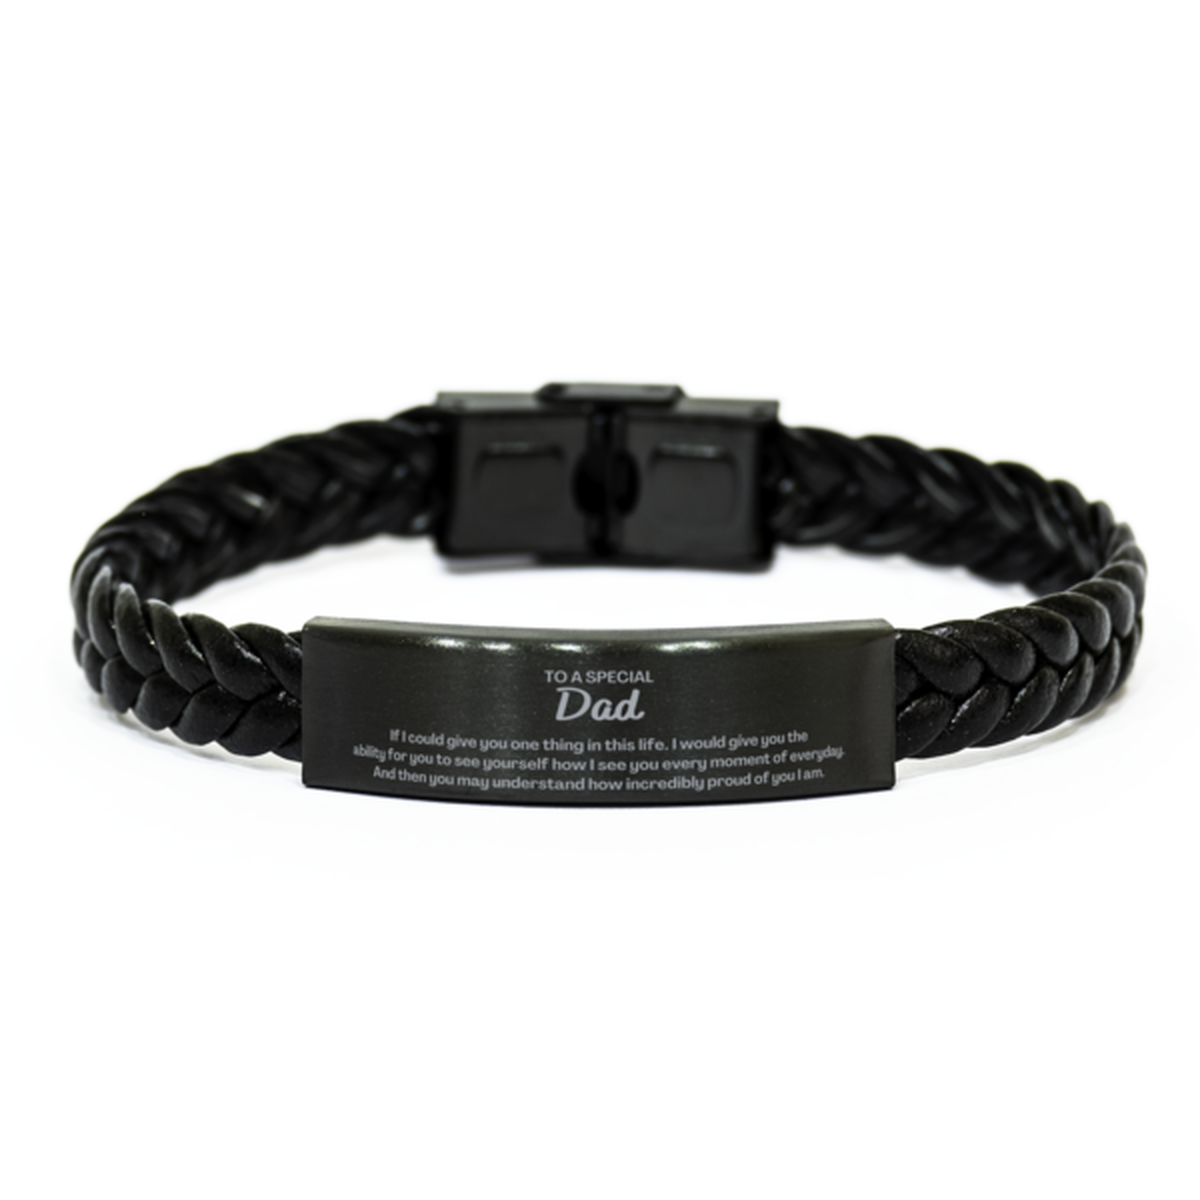 To My Dad Braided Leather Bracelet, Gifts For Dad Engraved, Inspirational Gifts for Christmas Birthday, Epic Gifts for Dad To A Special Dad how incredibly proud of you I am